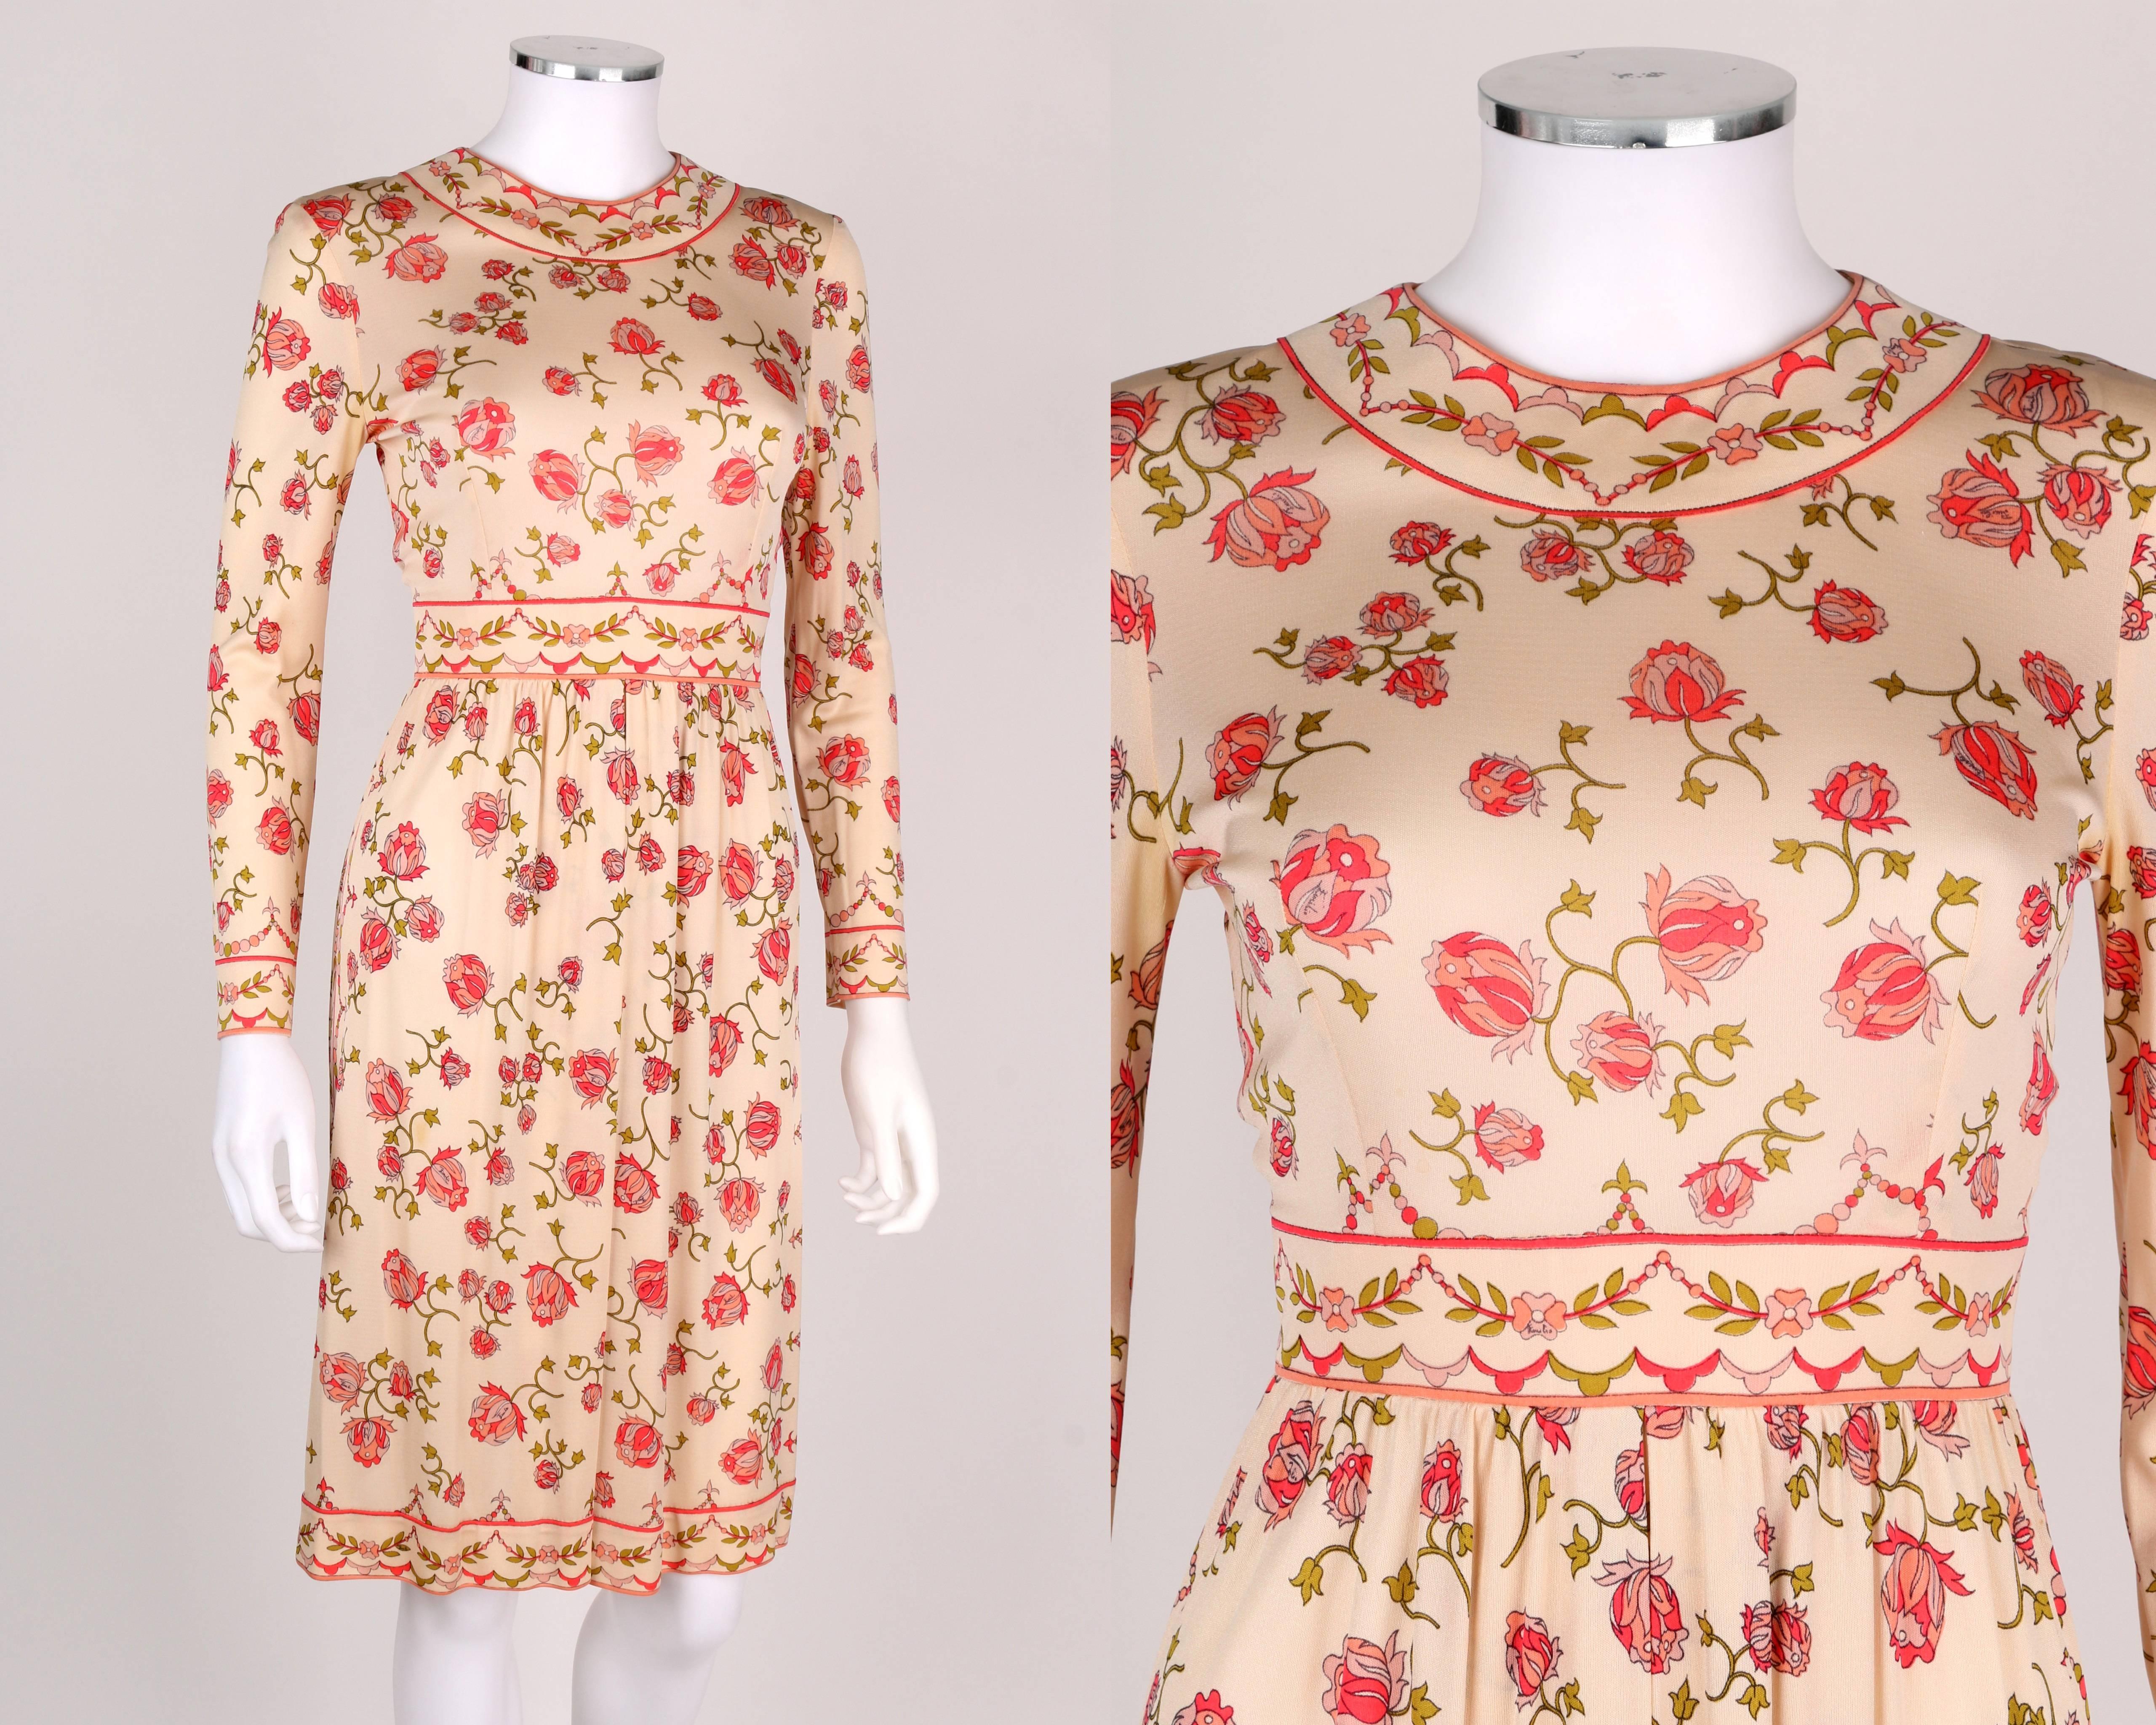 Vintage 1970’s Emilio Pucci rose signature print cream, pink and green silk jersey dress. Long sleeves. Round neckline. Yoked waist. Gathered skirt with center pleat detail. Decorative border at collar, waist and hemline. Center back zipper and